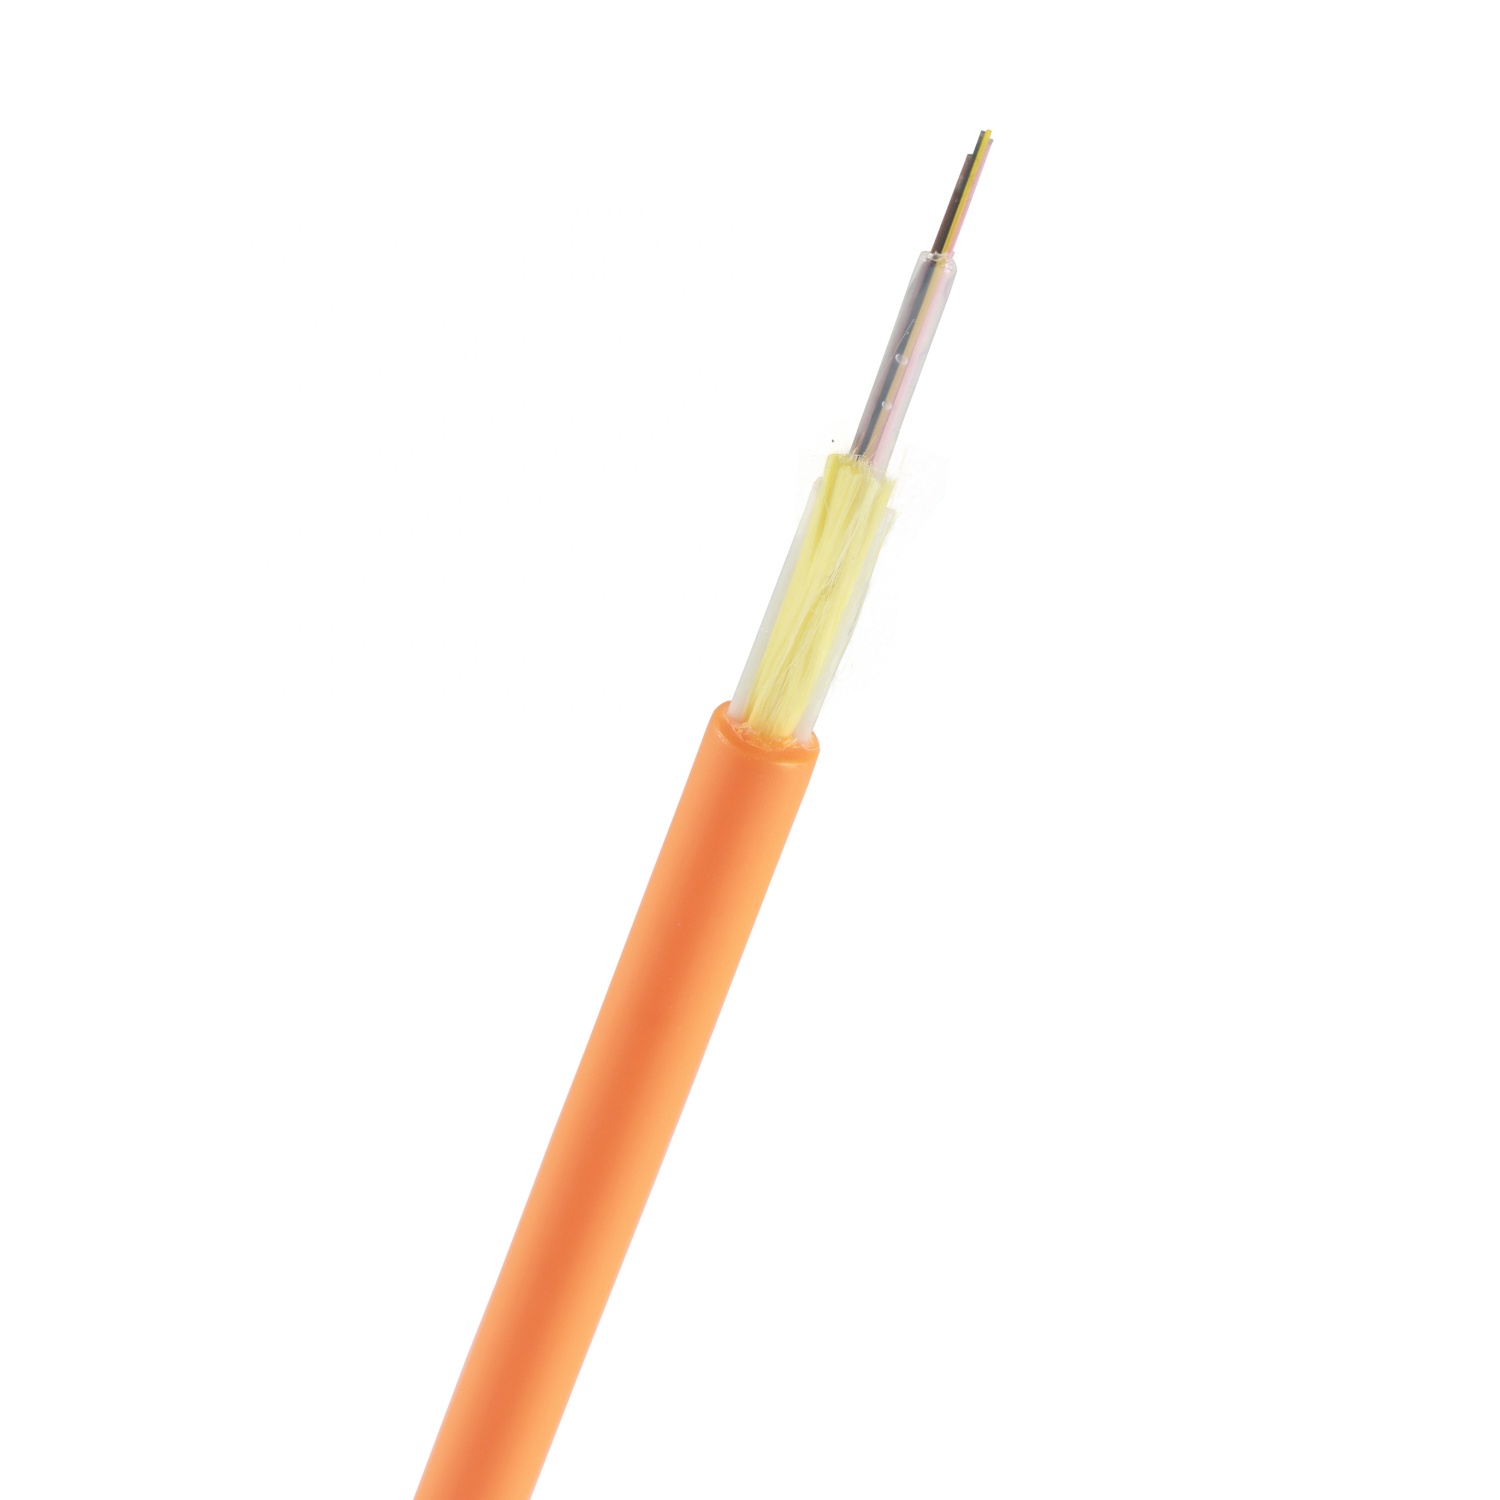 Direct Buried access DAC 4 core fiber optic cable popular used in Poland Czech